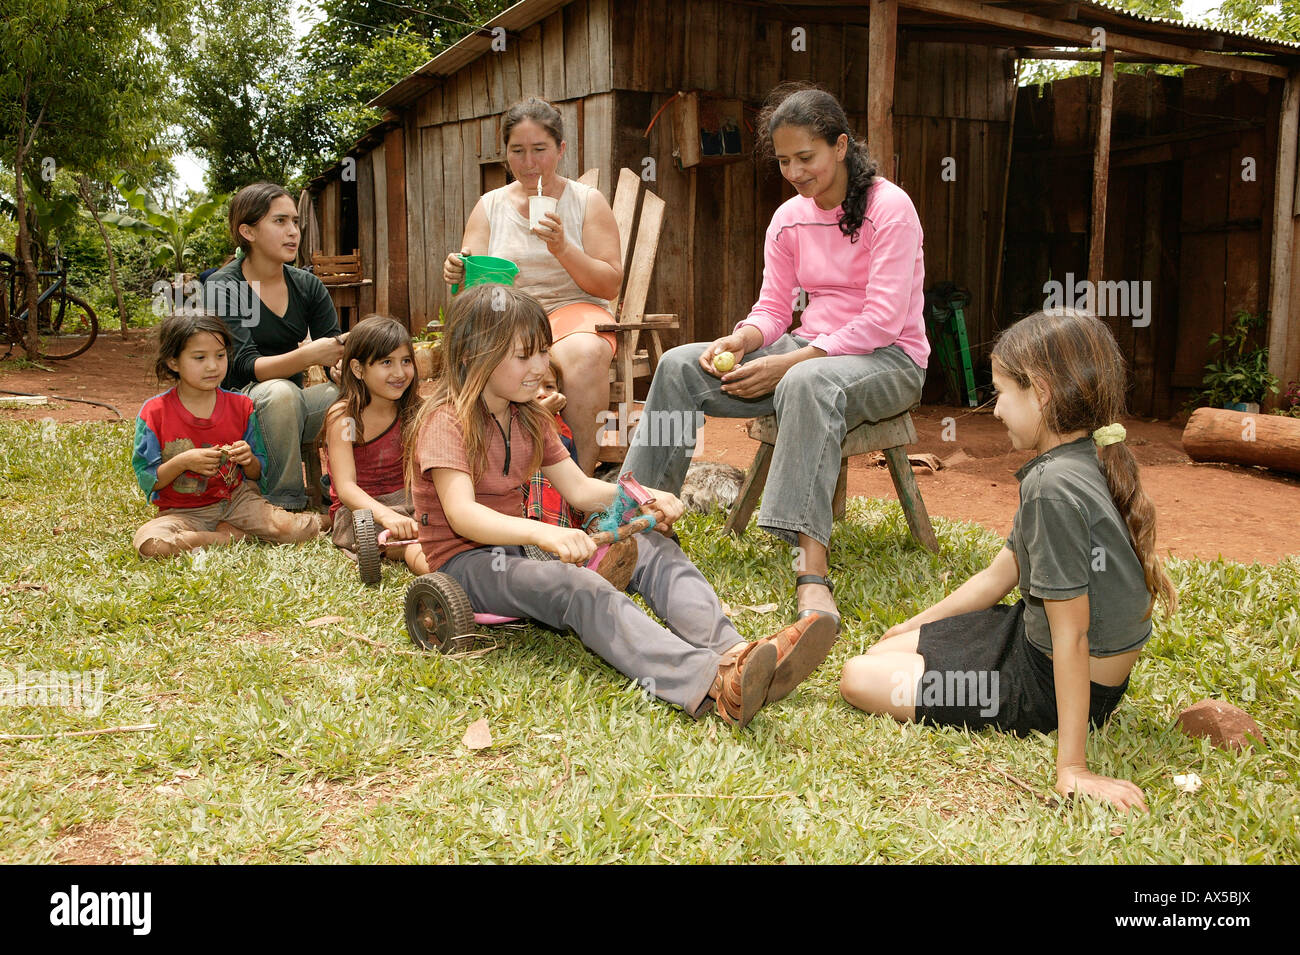 Work break in front of the house, women with children, Asuncion, Paraguay, South America Stock Photo